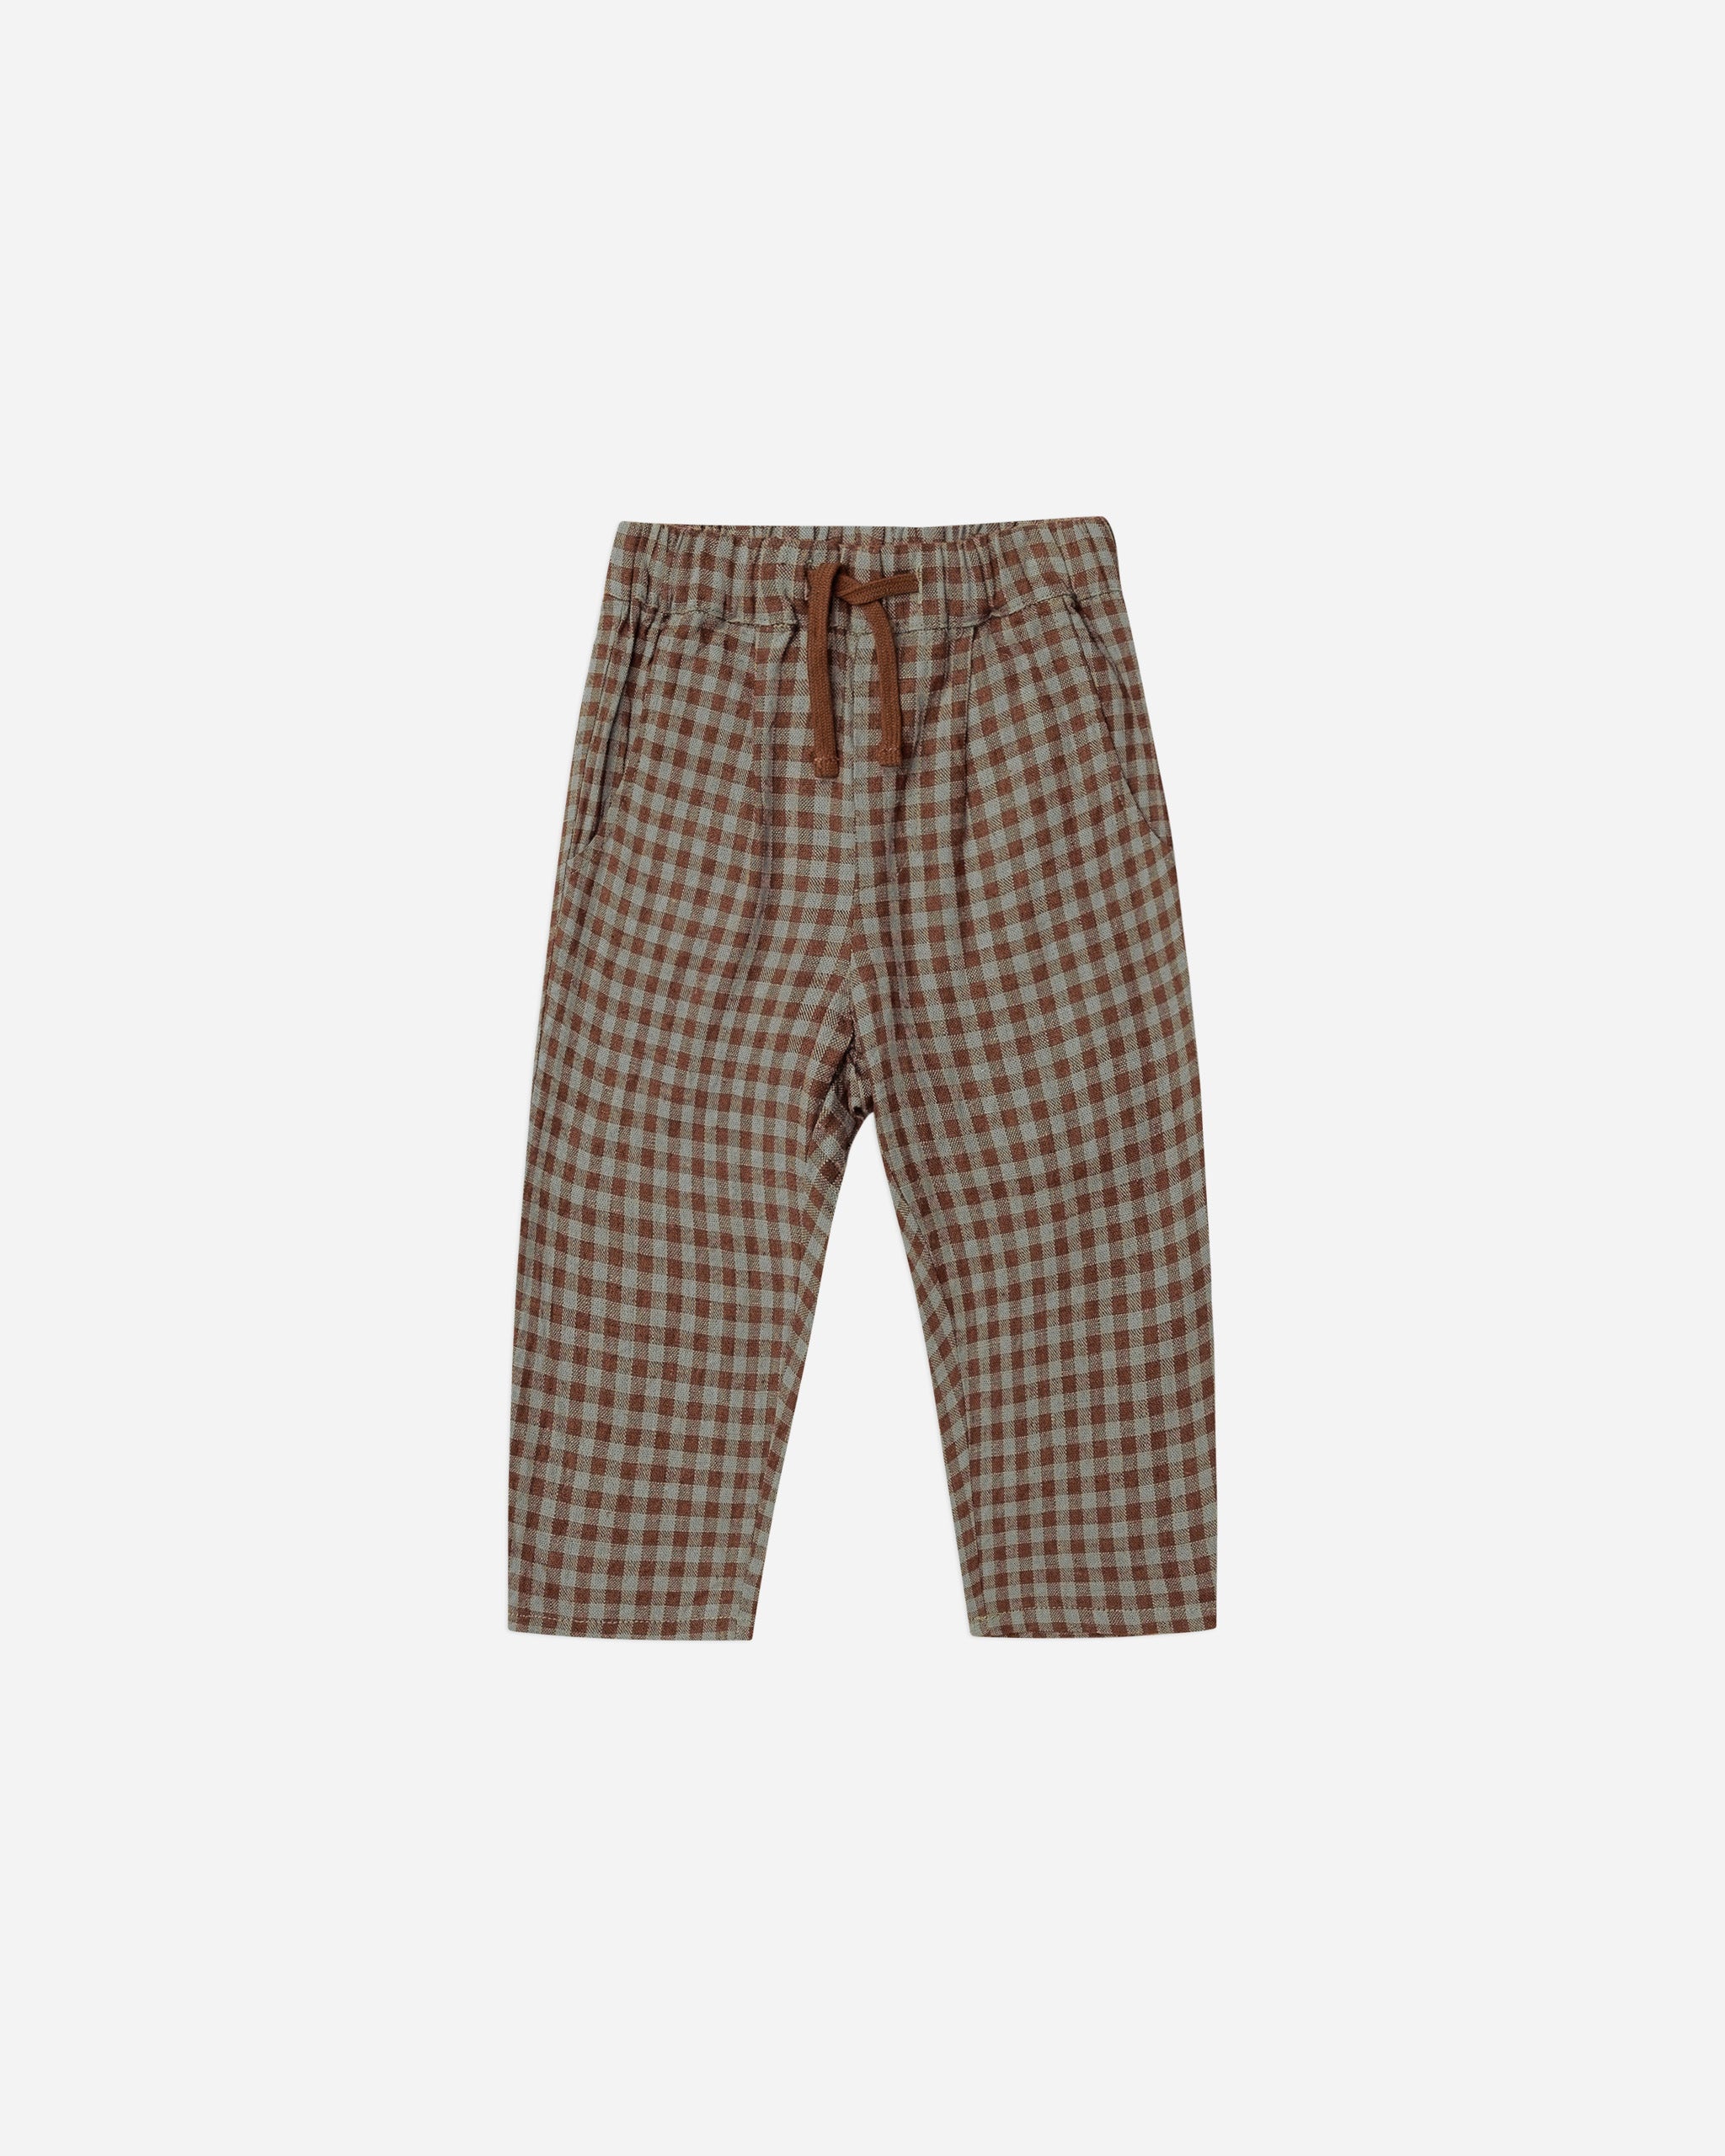 ethan trouser || gingham - Rylee + Cru | Kids Clothes | Trendy Baby Clothes | Modern Infant Outfits |